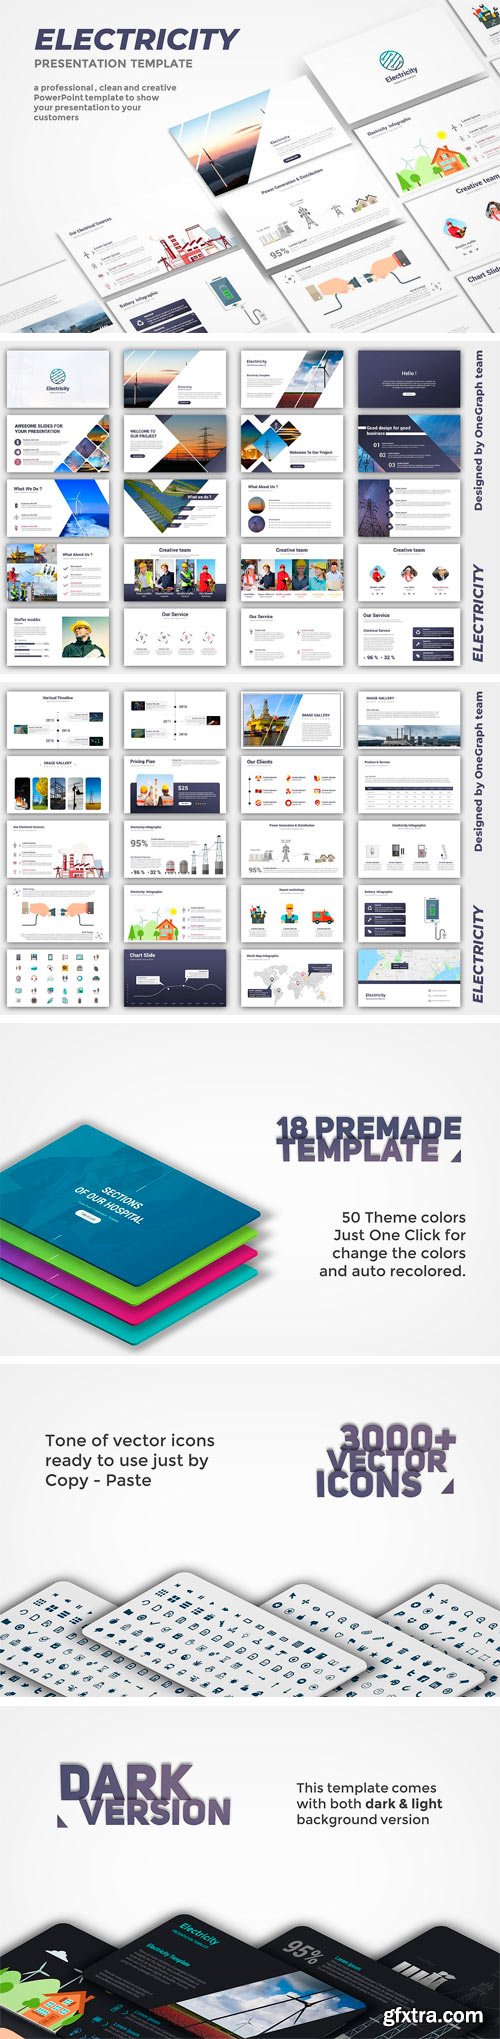 CM - Electricity PowerPoint Template 2182170